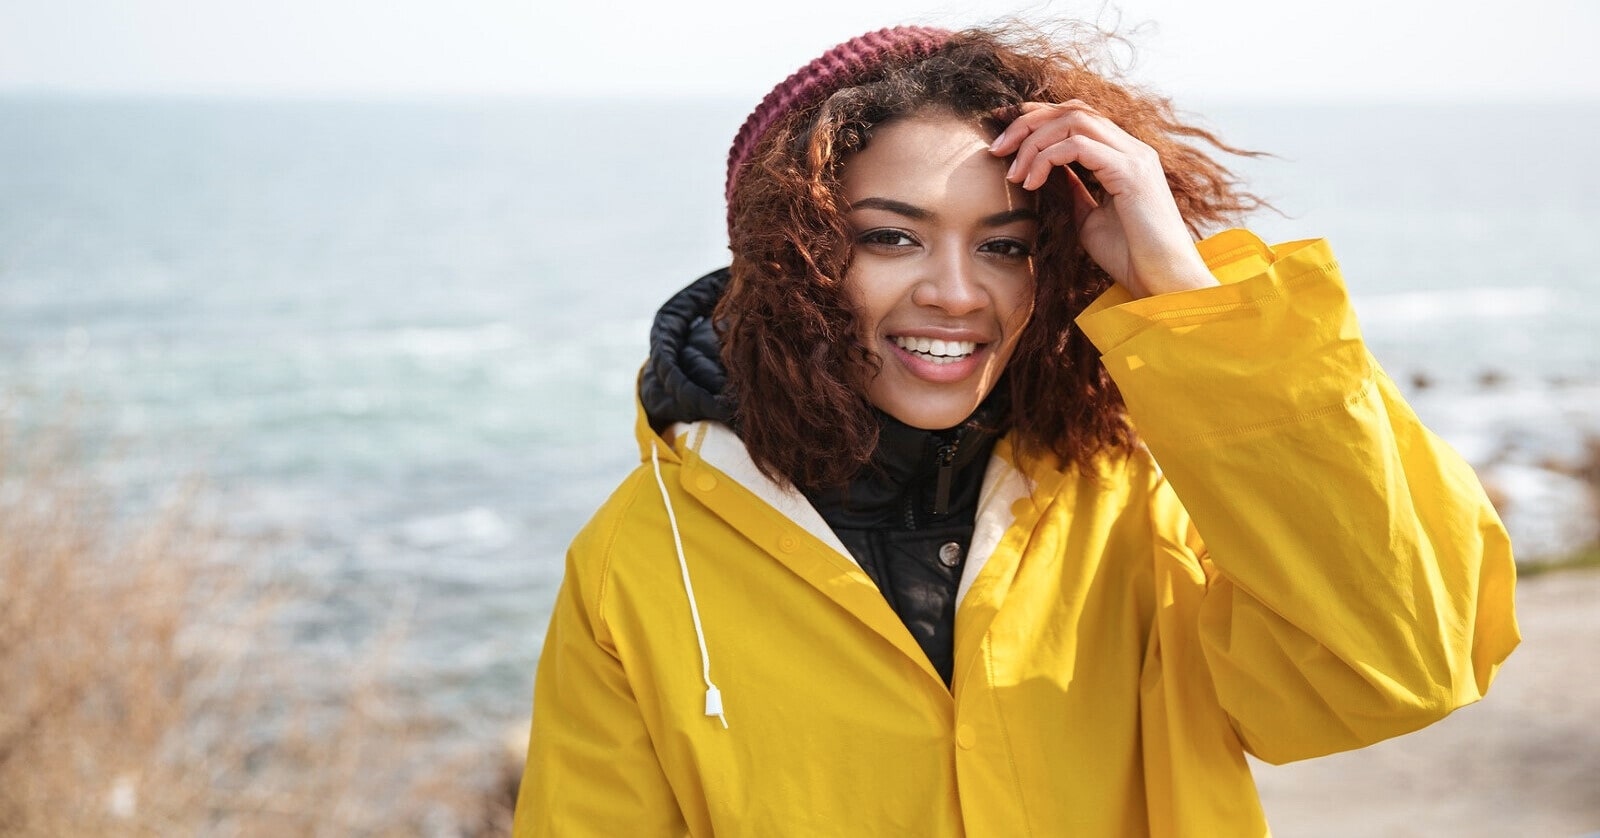 smiling woman wearing yellow raincoat with ocean in the background